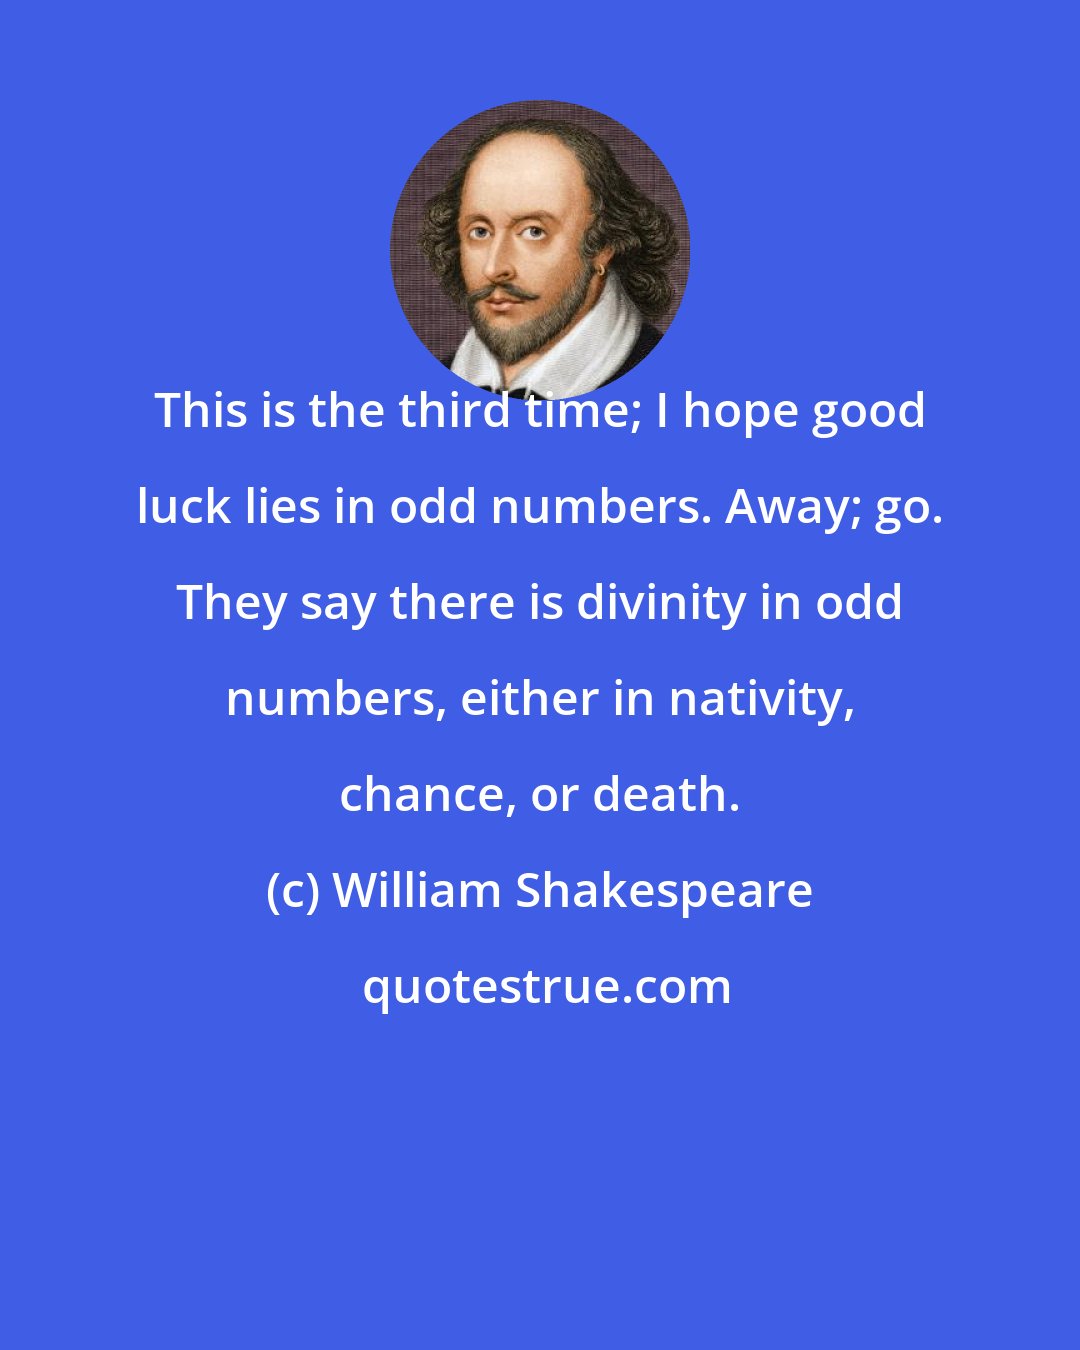 William Shakespeare: This is the third time; I hope good luck lies in odd numbers. Away; go. They say there is divinity in odd numbers, either in nativity, chance, or death.